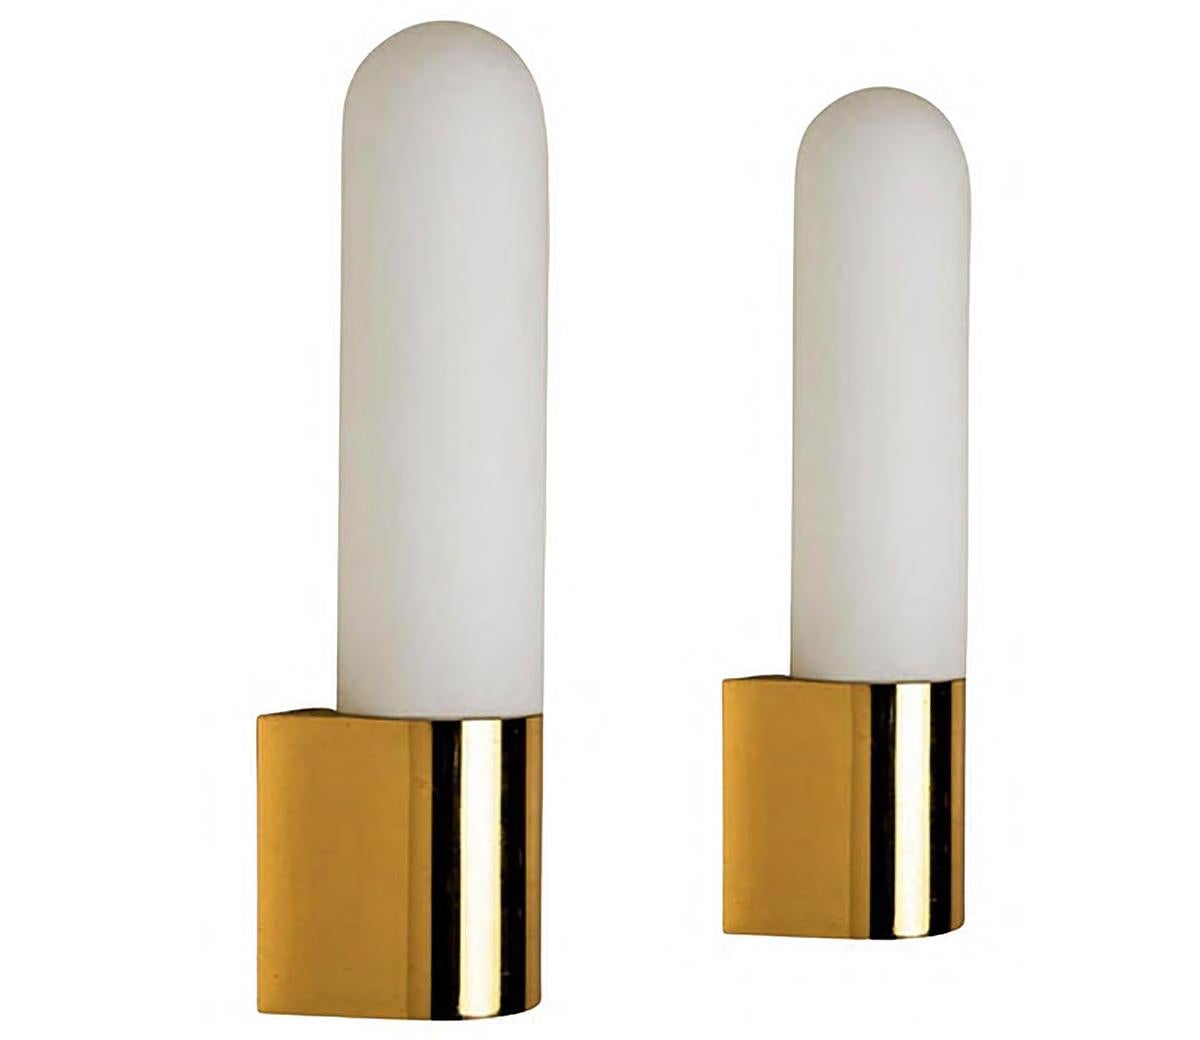 Superb heavy-quality glass wall lamp/sconces in brass encasing and white, opaque glass. Manufactured by Glasshütte Limburg, Germany, circa 1970.

These wall lights give a beautiful glowing light that would suit any space.
Bathroom, Hallway, WC,